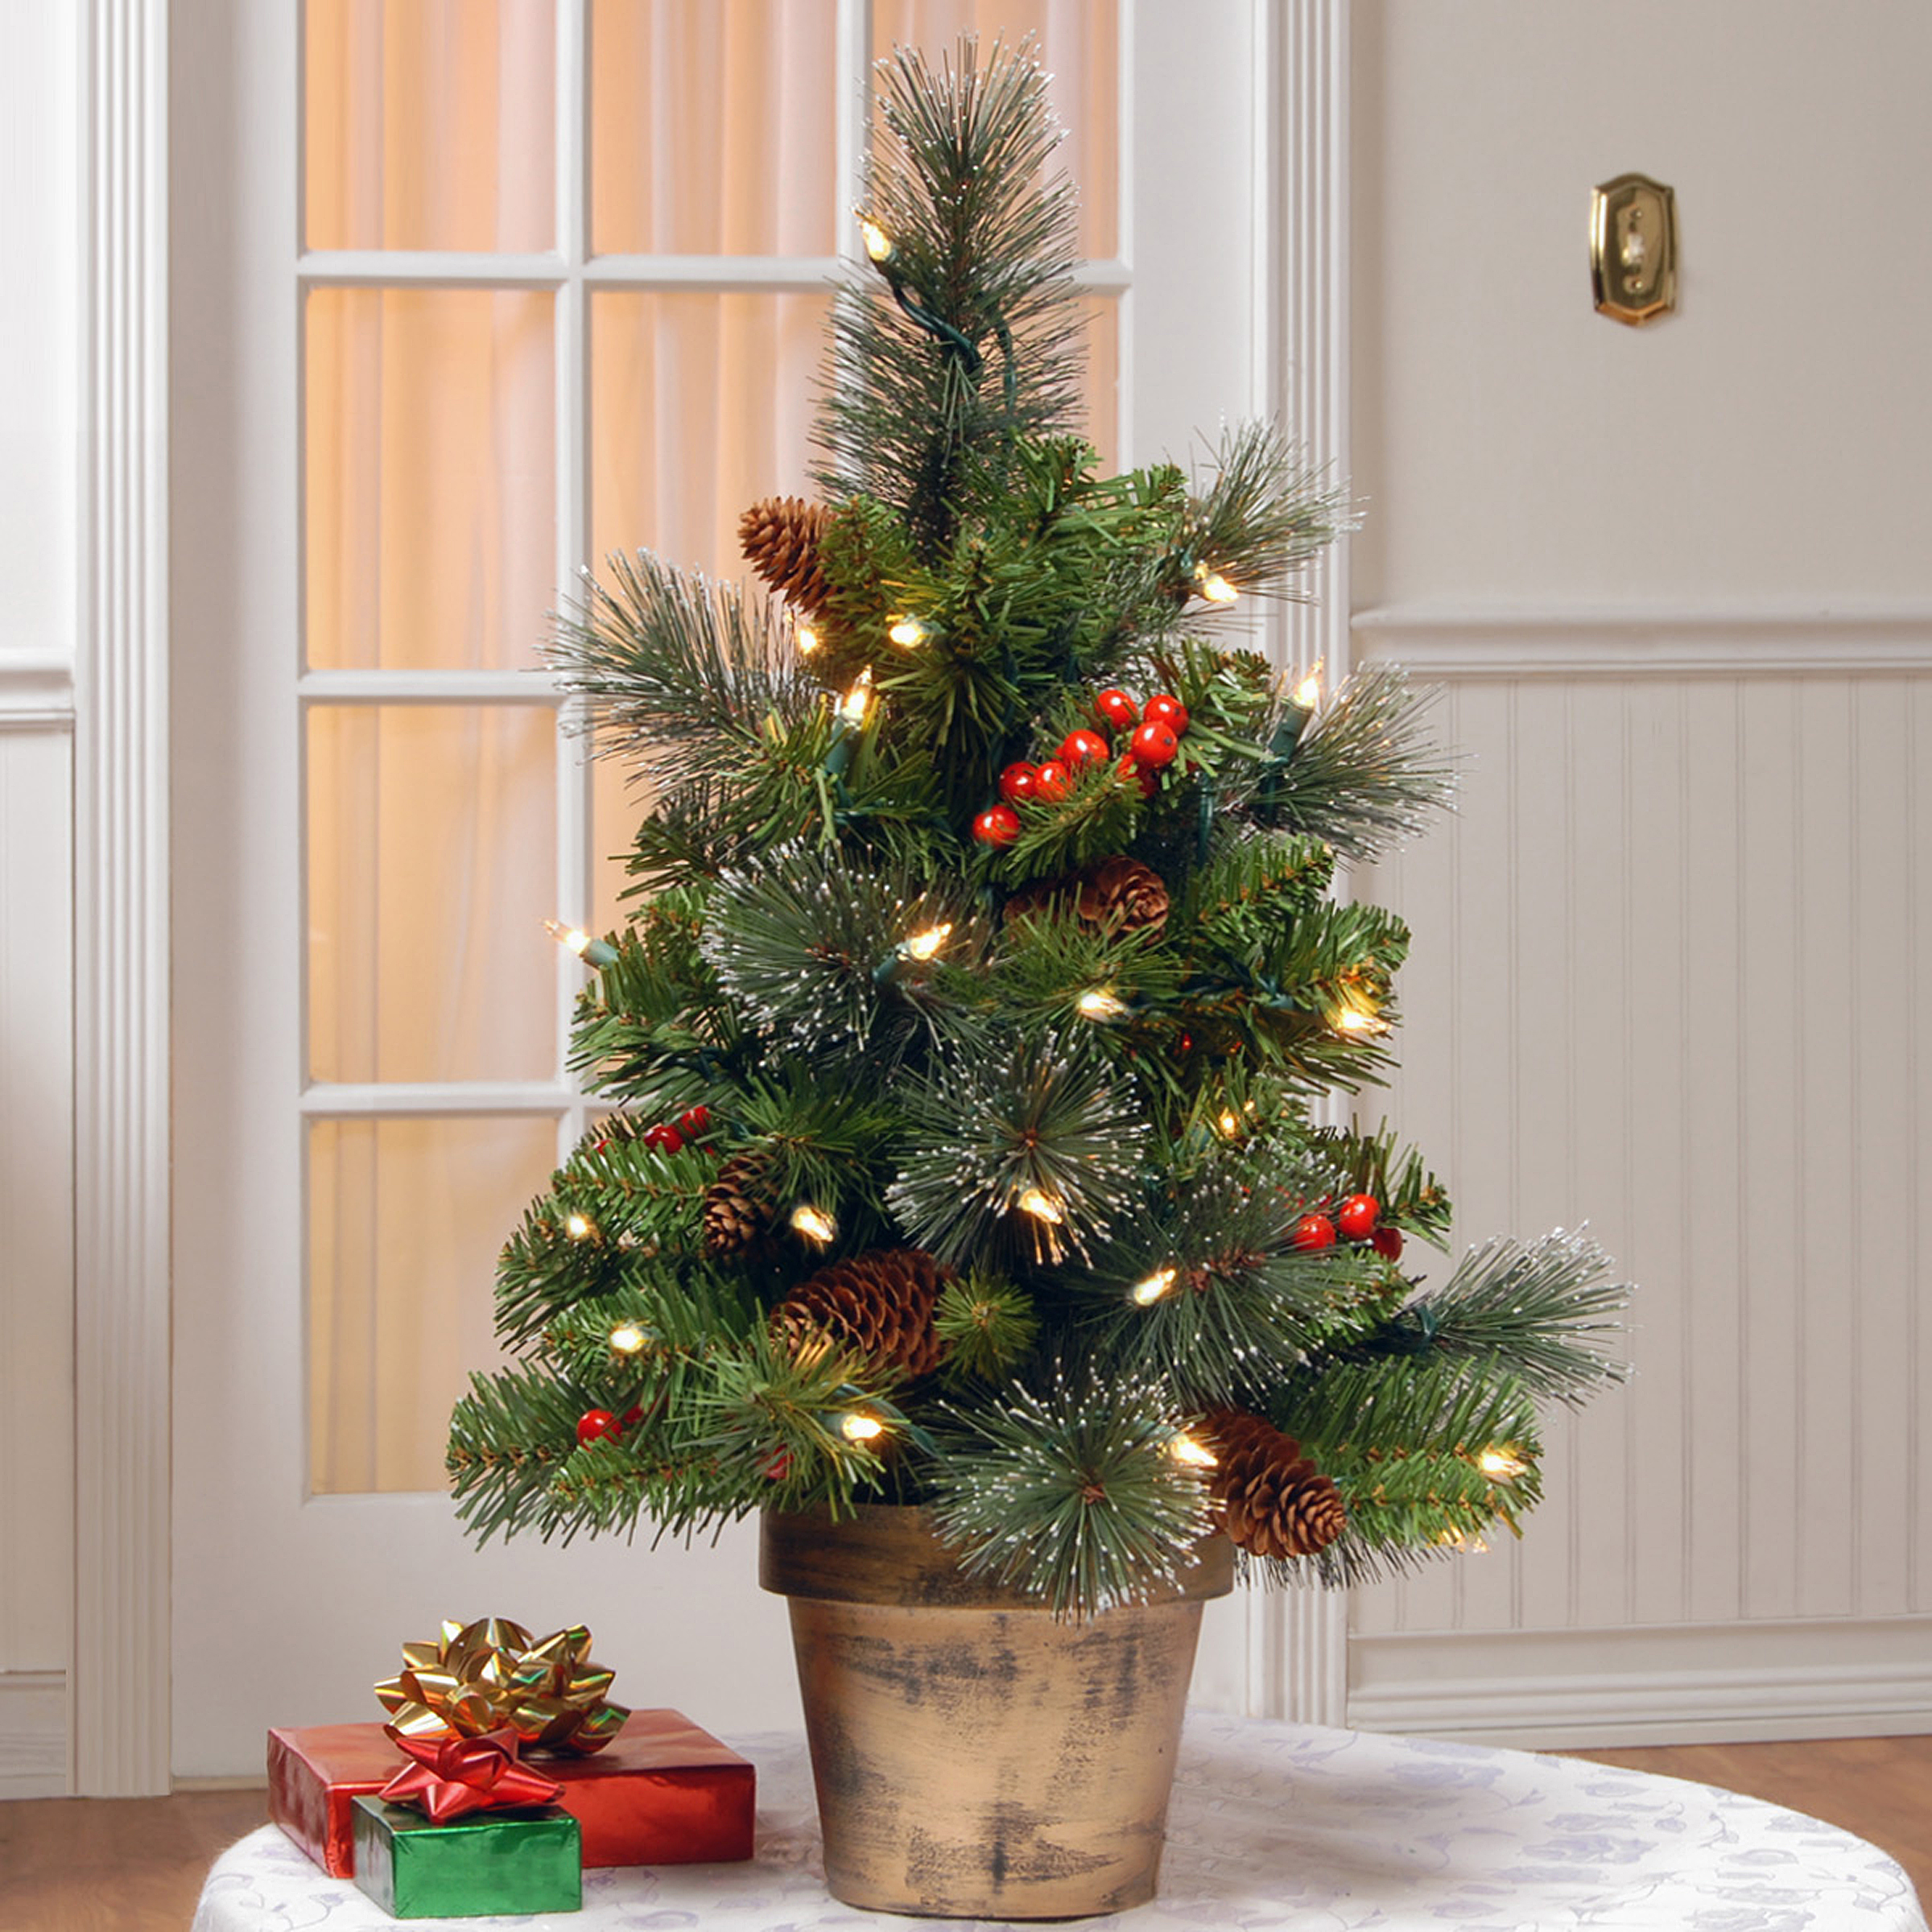 National Tree Company Pre-Lit Artificial Mini Christmas Tree, Green, Crestwood Spruce, White Lights, Decorated with Pine Cones, Berry Clusters, Frosted Branches, Includes Pot Base, 2 Feet - image 2 of 5